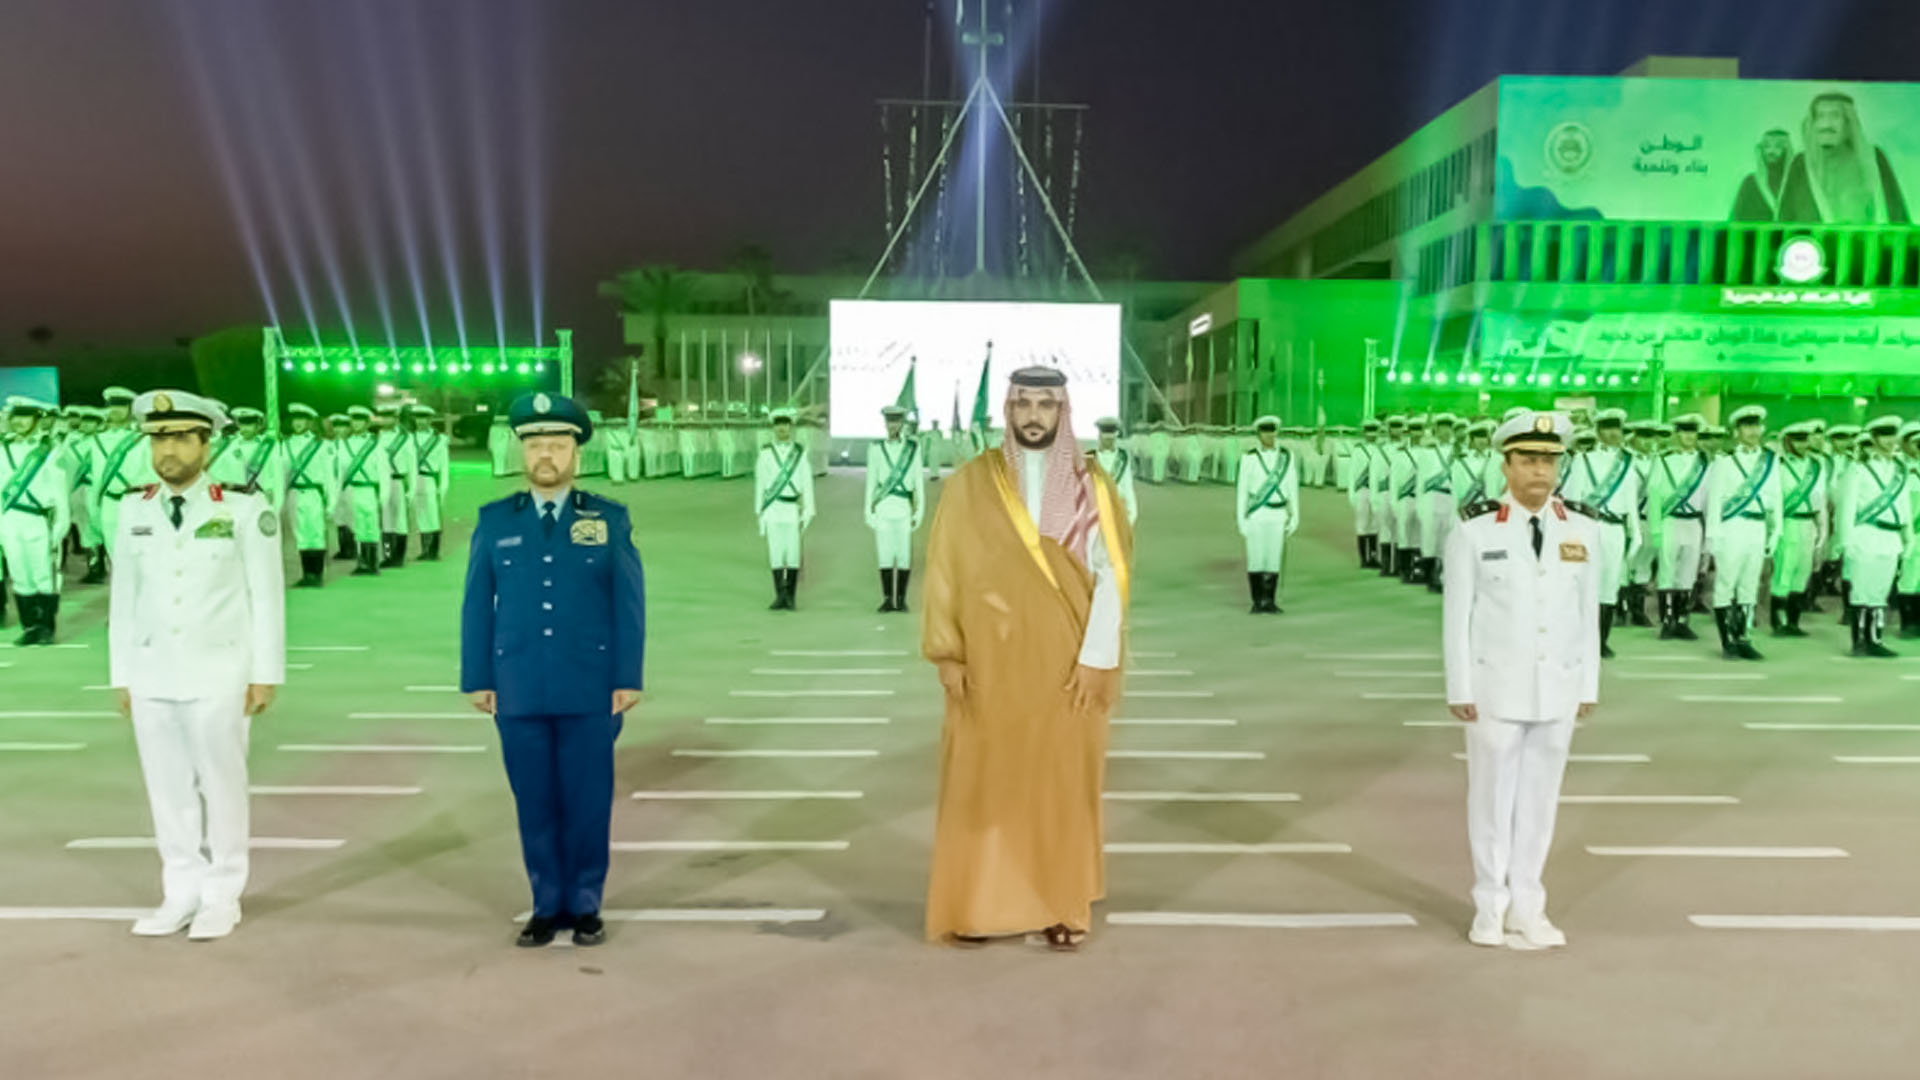 The 35th batch of cadets has graduated from King Fahd Naval College